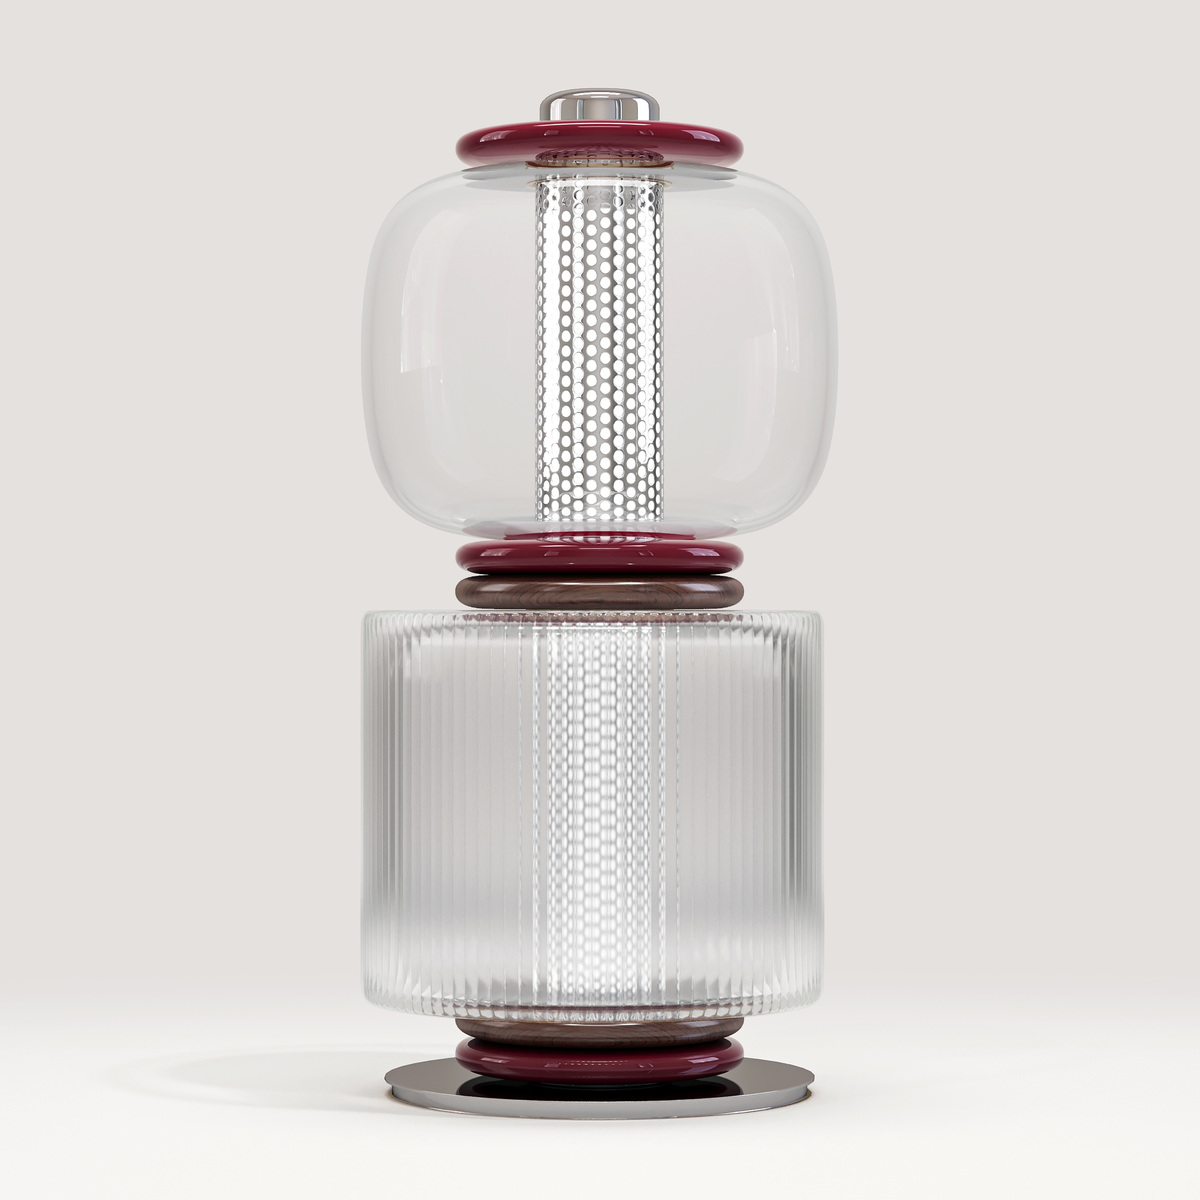 Luminaire Loulou | 2 module, Aubergine - H72 x ø34 cm - Blown glass/polished stainless steel - image 1